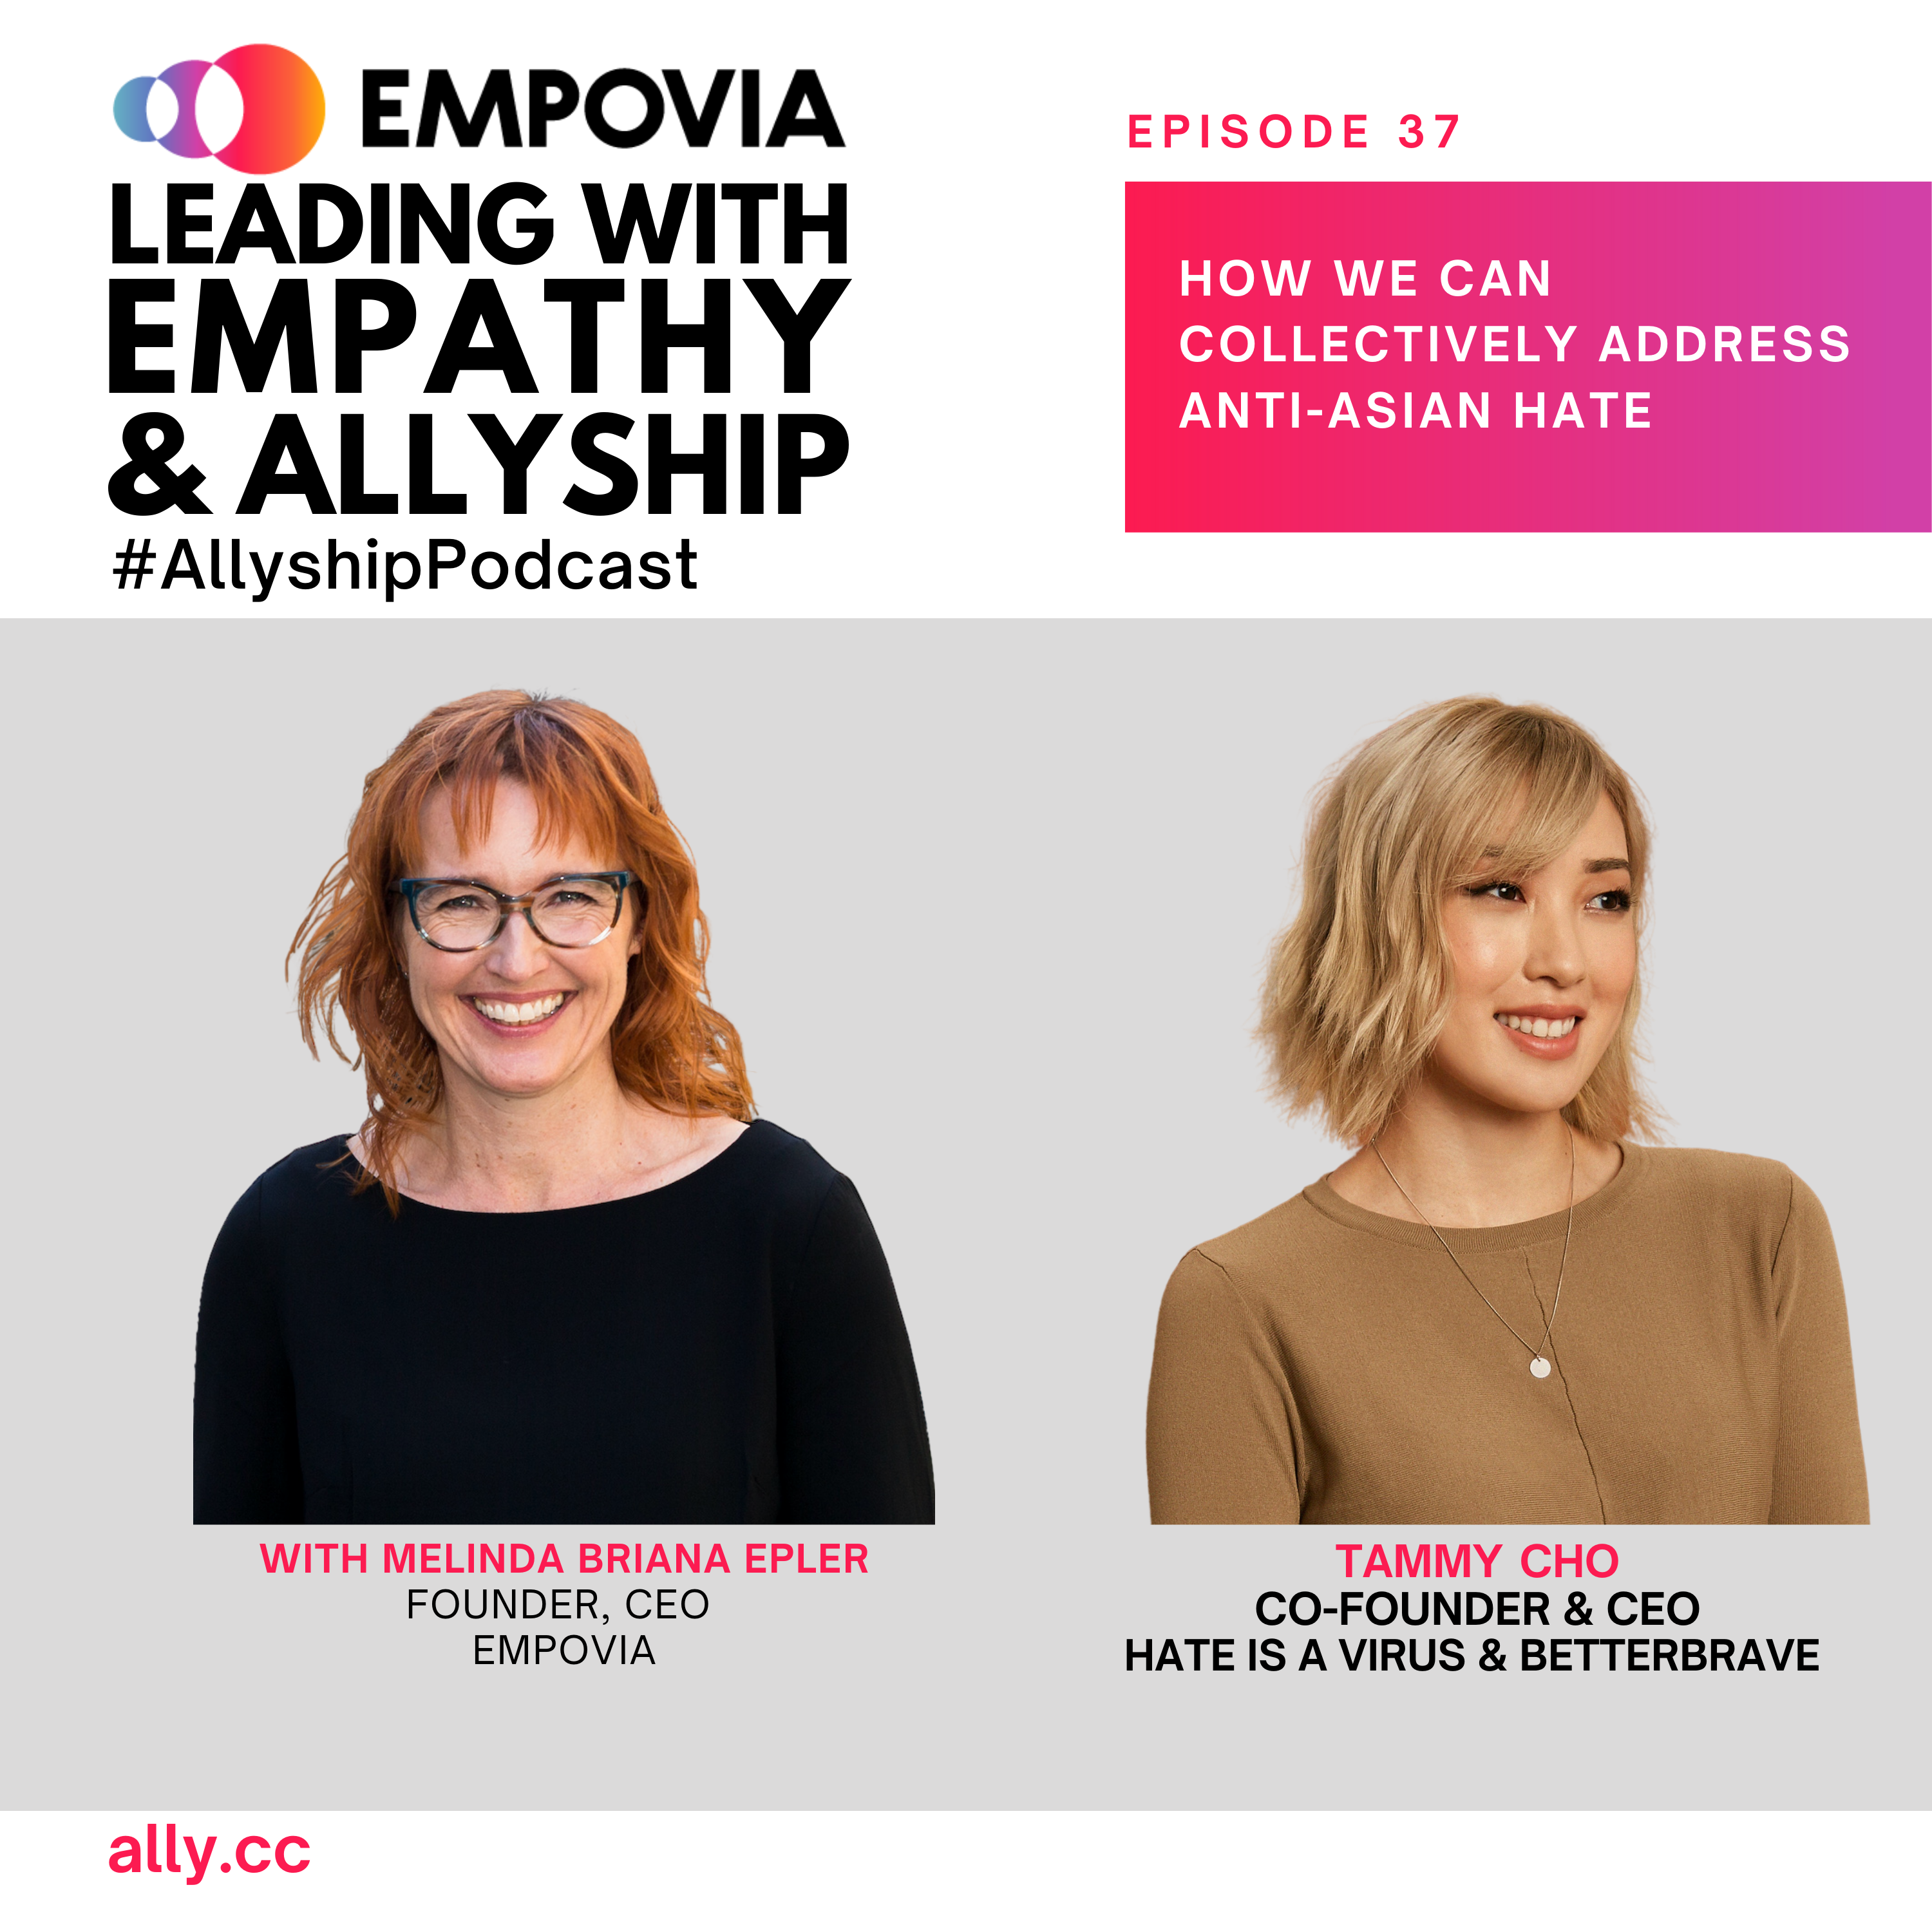 Leading With Empathy & Allyship promo with the Empovia logo and photos of host Melinda Briana Epler, a White woman with red hair and glasses, and Tammy Cho, an Asian woman with short blonde hair and tan sweater.